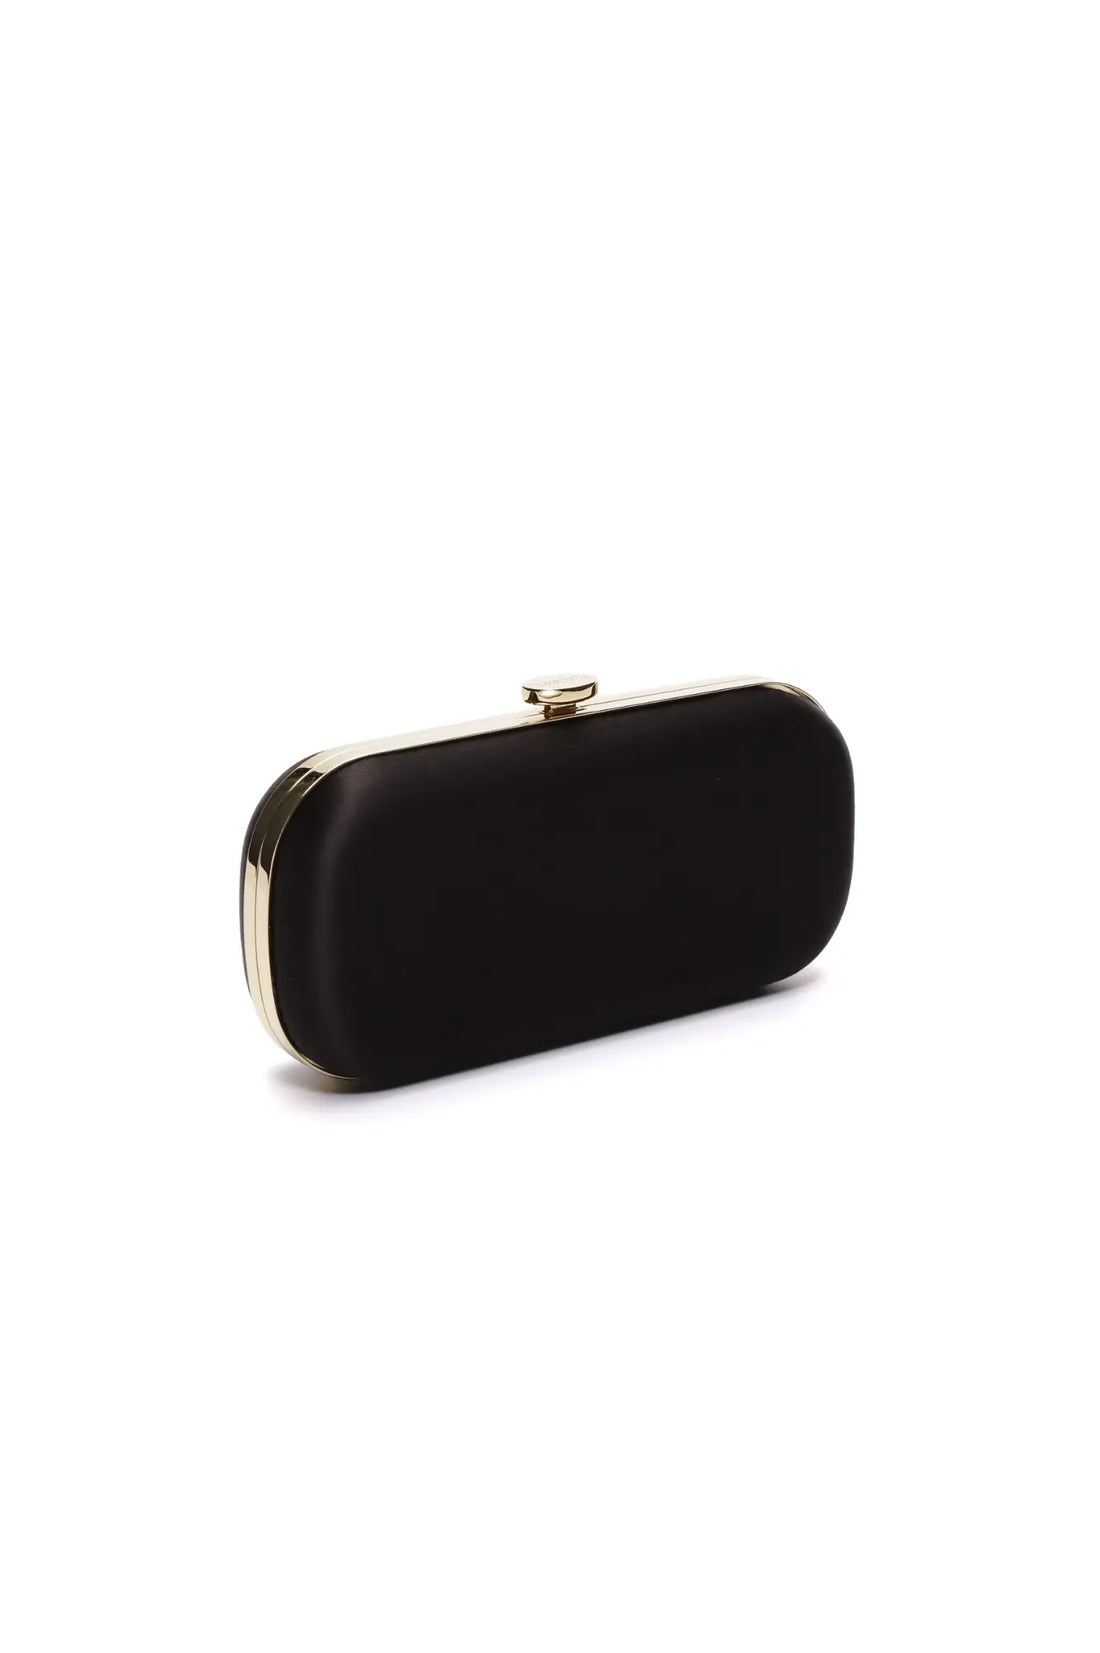 Black Satin Bella Clutch from The Bella Rosa Collection with gold-tone frame on a white background.